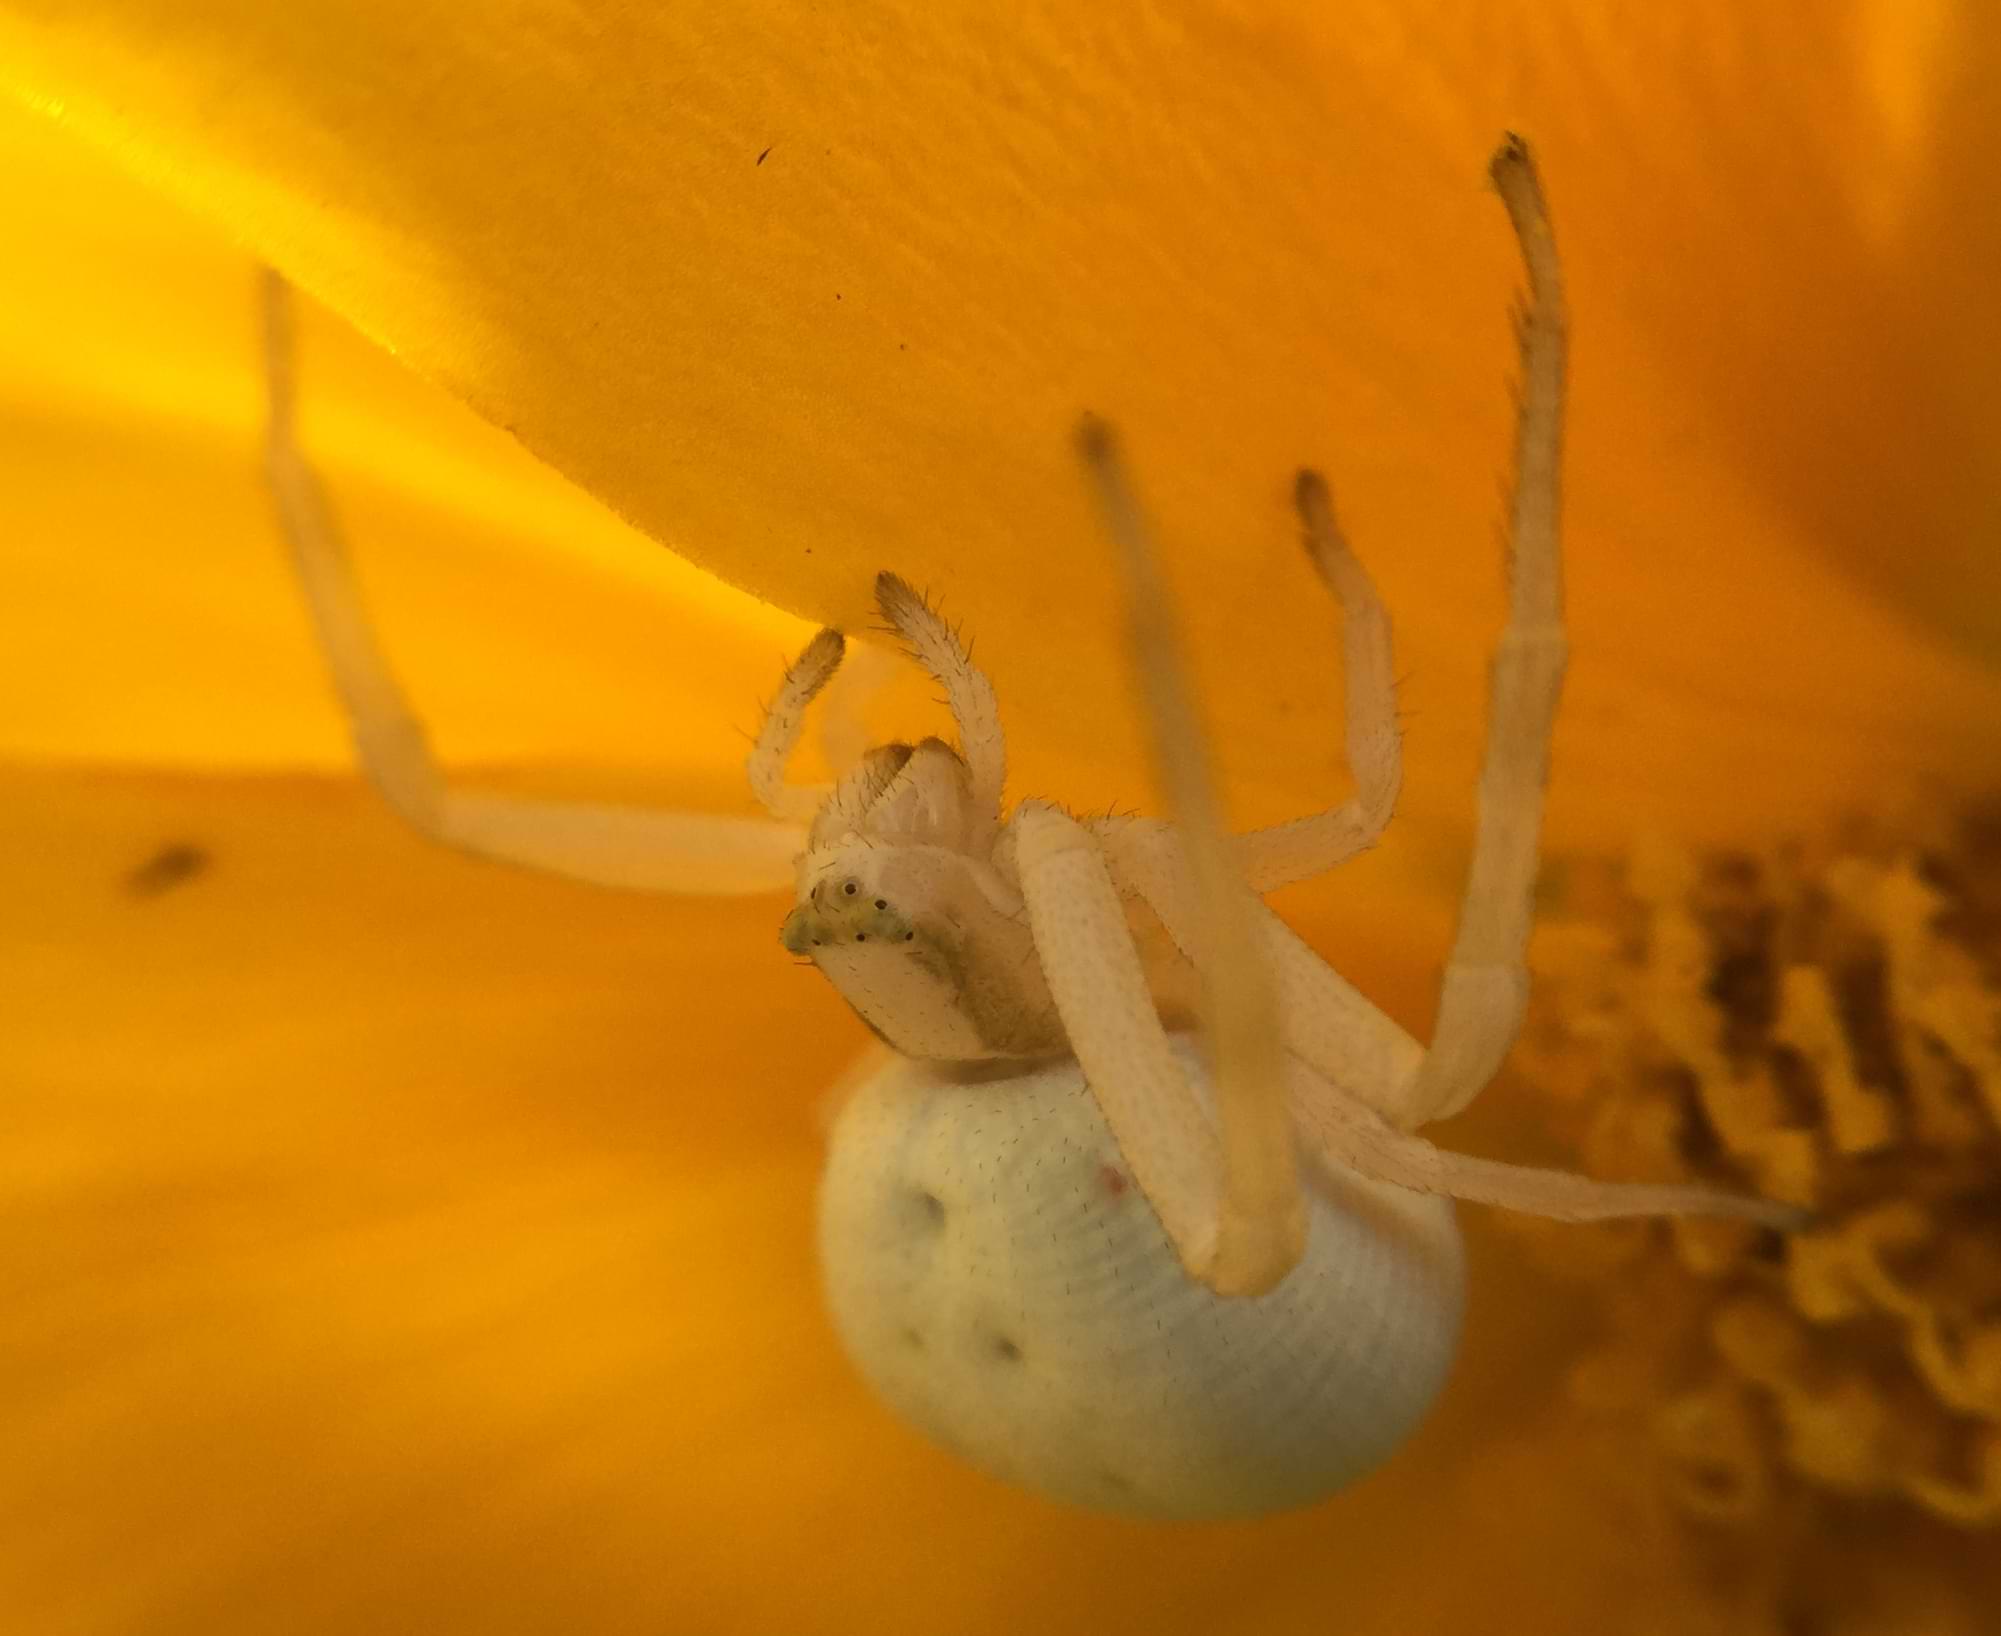 A big white spider with long legs and a huge abdomen. Its body is covered in small hairs and has brown stripes running down the side of its cephalothorax.